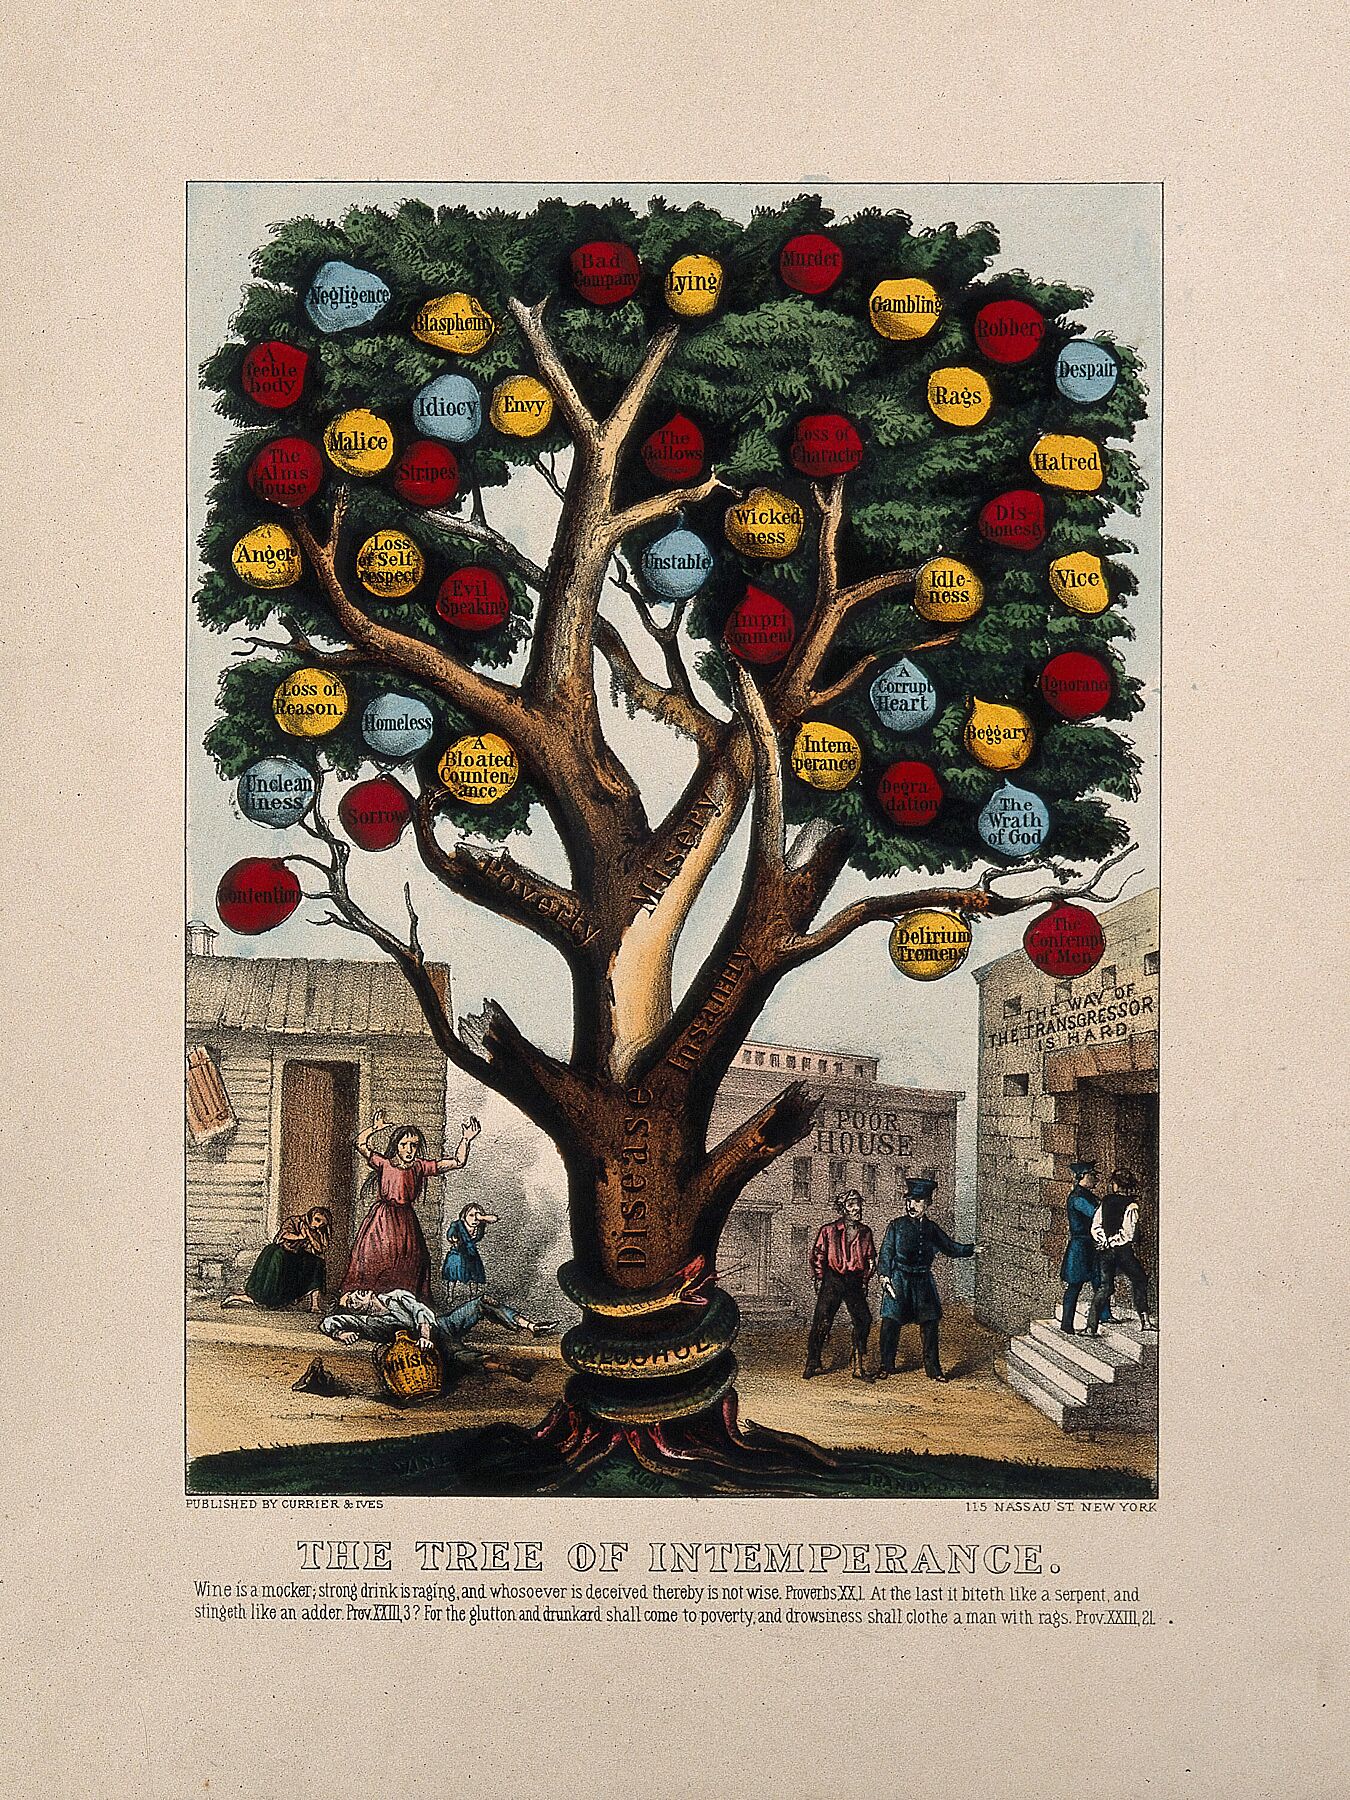 The tree of intemperance, showing diseases and vices caused by alcohol. Coloured lithograph, 18--.